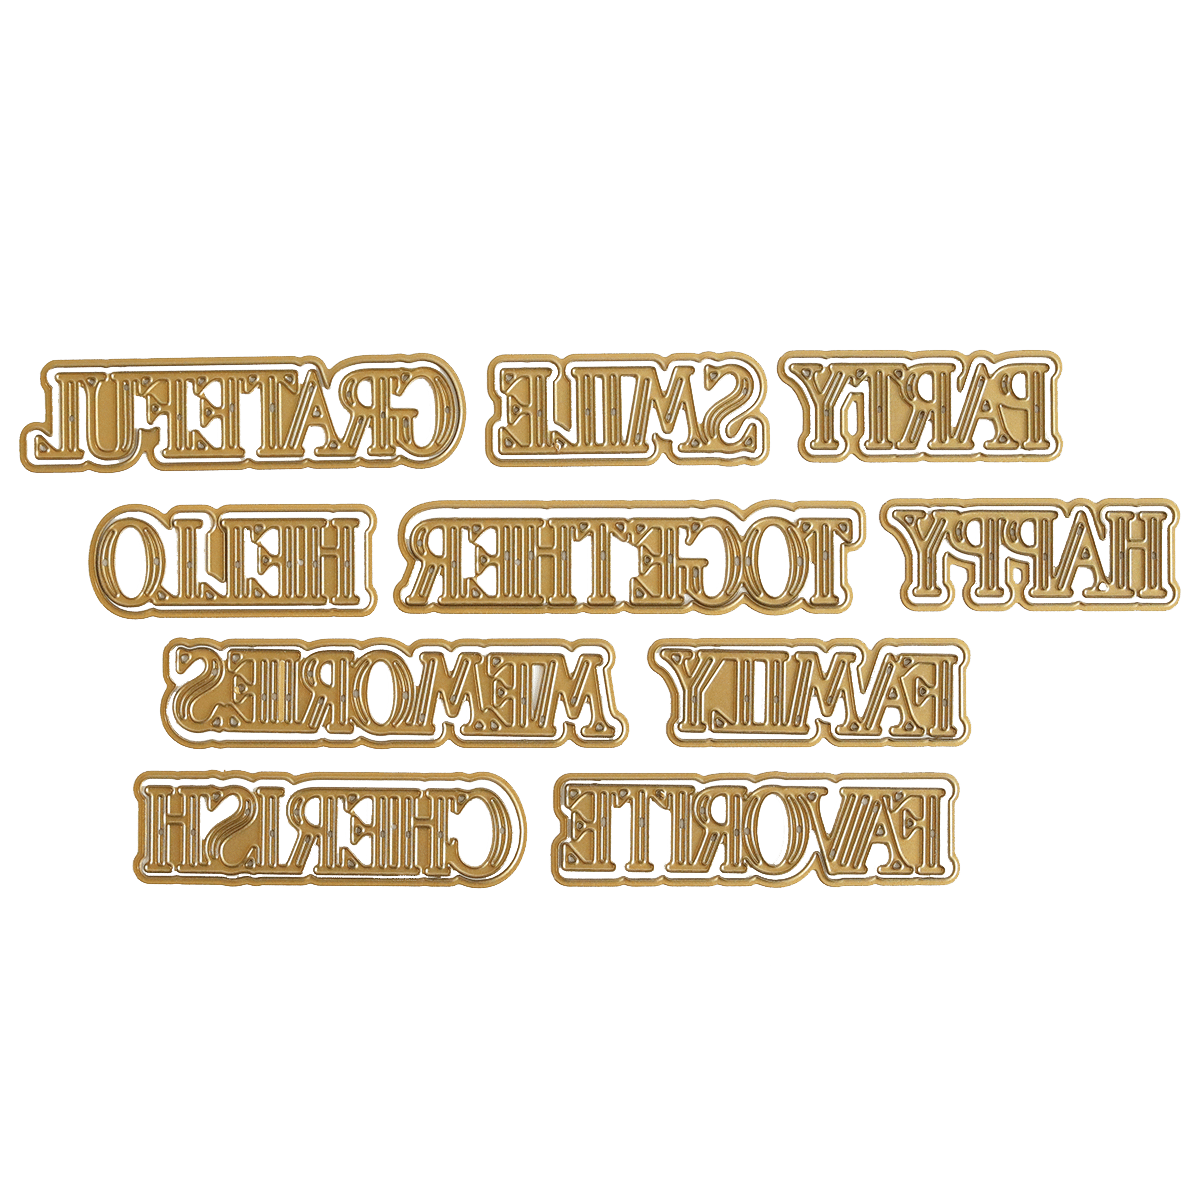 a green background with gold lettering that says, early smile grateful happy together hero family.